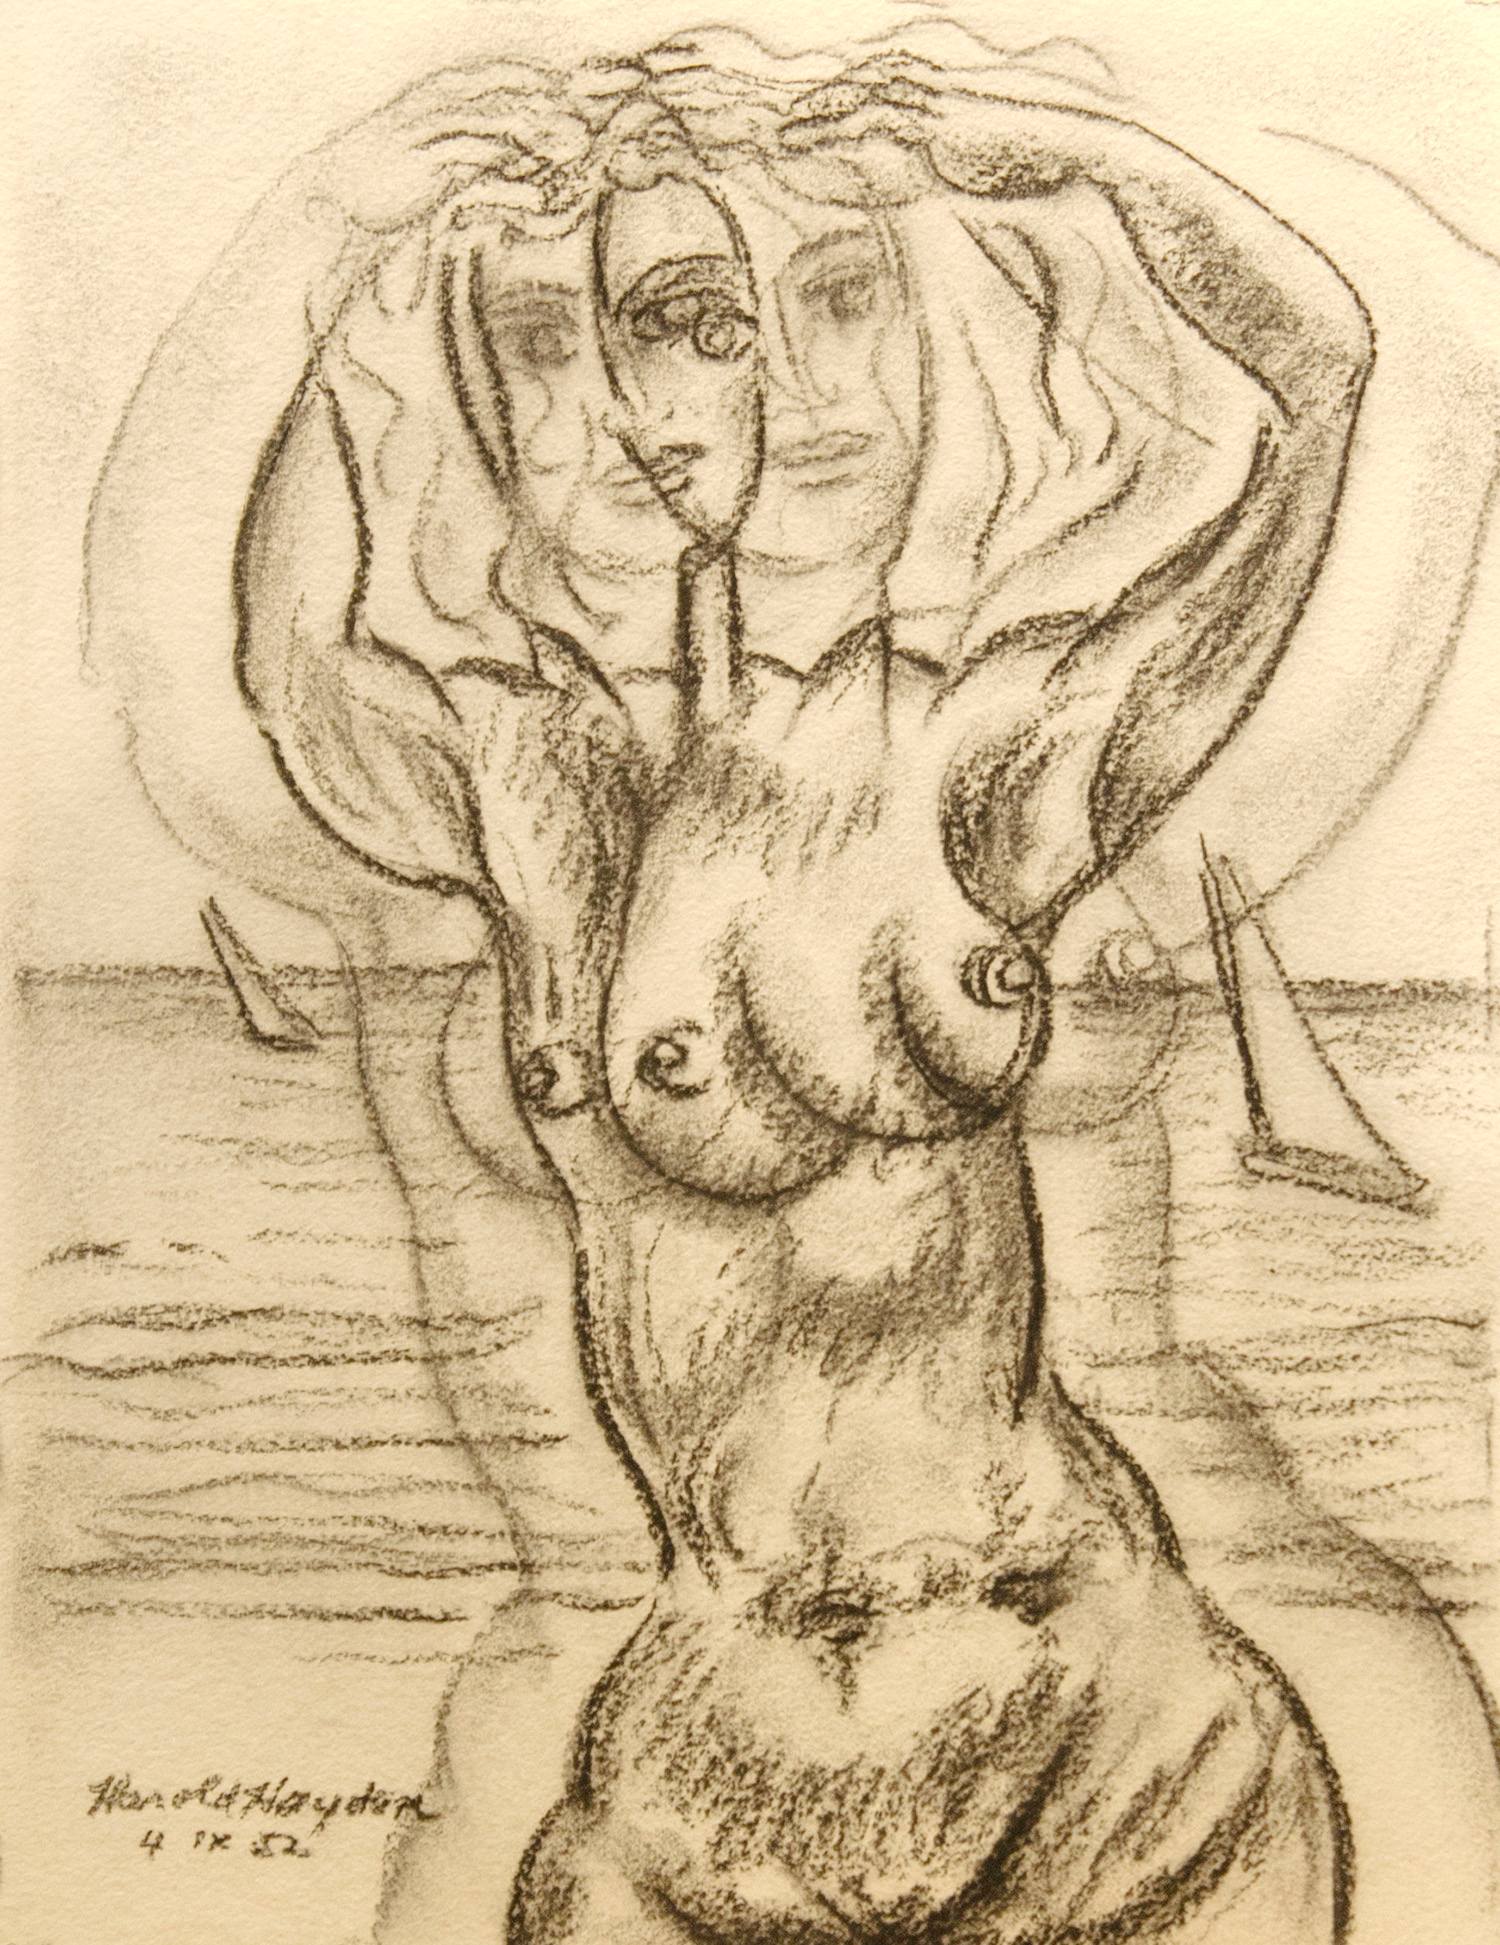 Harold Haydon (Am. 1909-1994)
Figure Study (Standing Nude- Bather)
Charcoal on paper, 1952
22 1/2” x 15 1/2”  (Framed: 29” x 25”)
Signed, dated Harold Haydon, 4-1X-52 lower left
